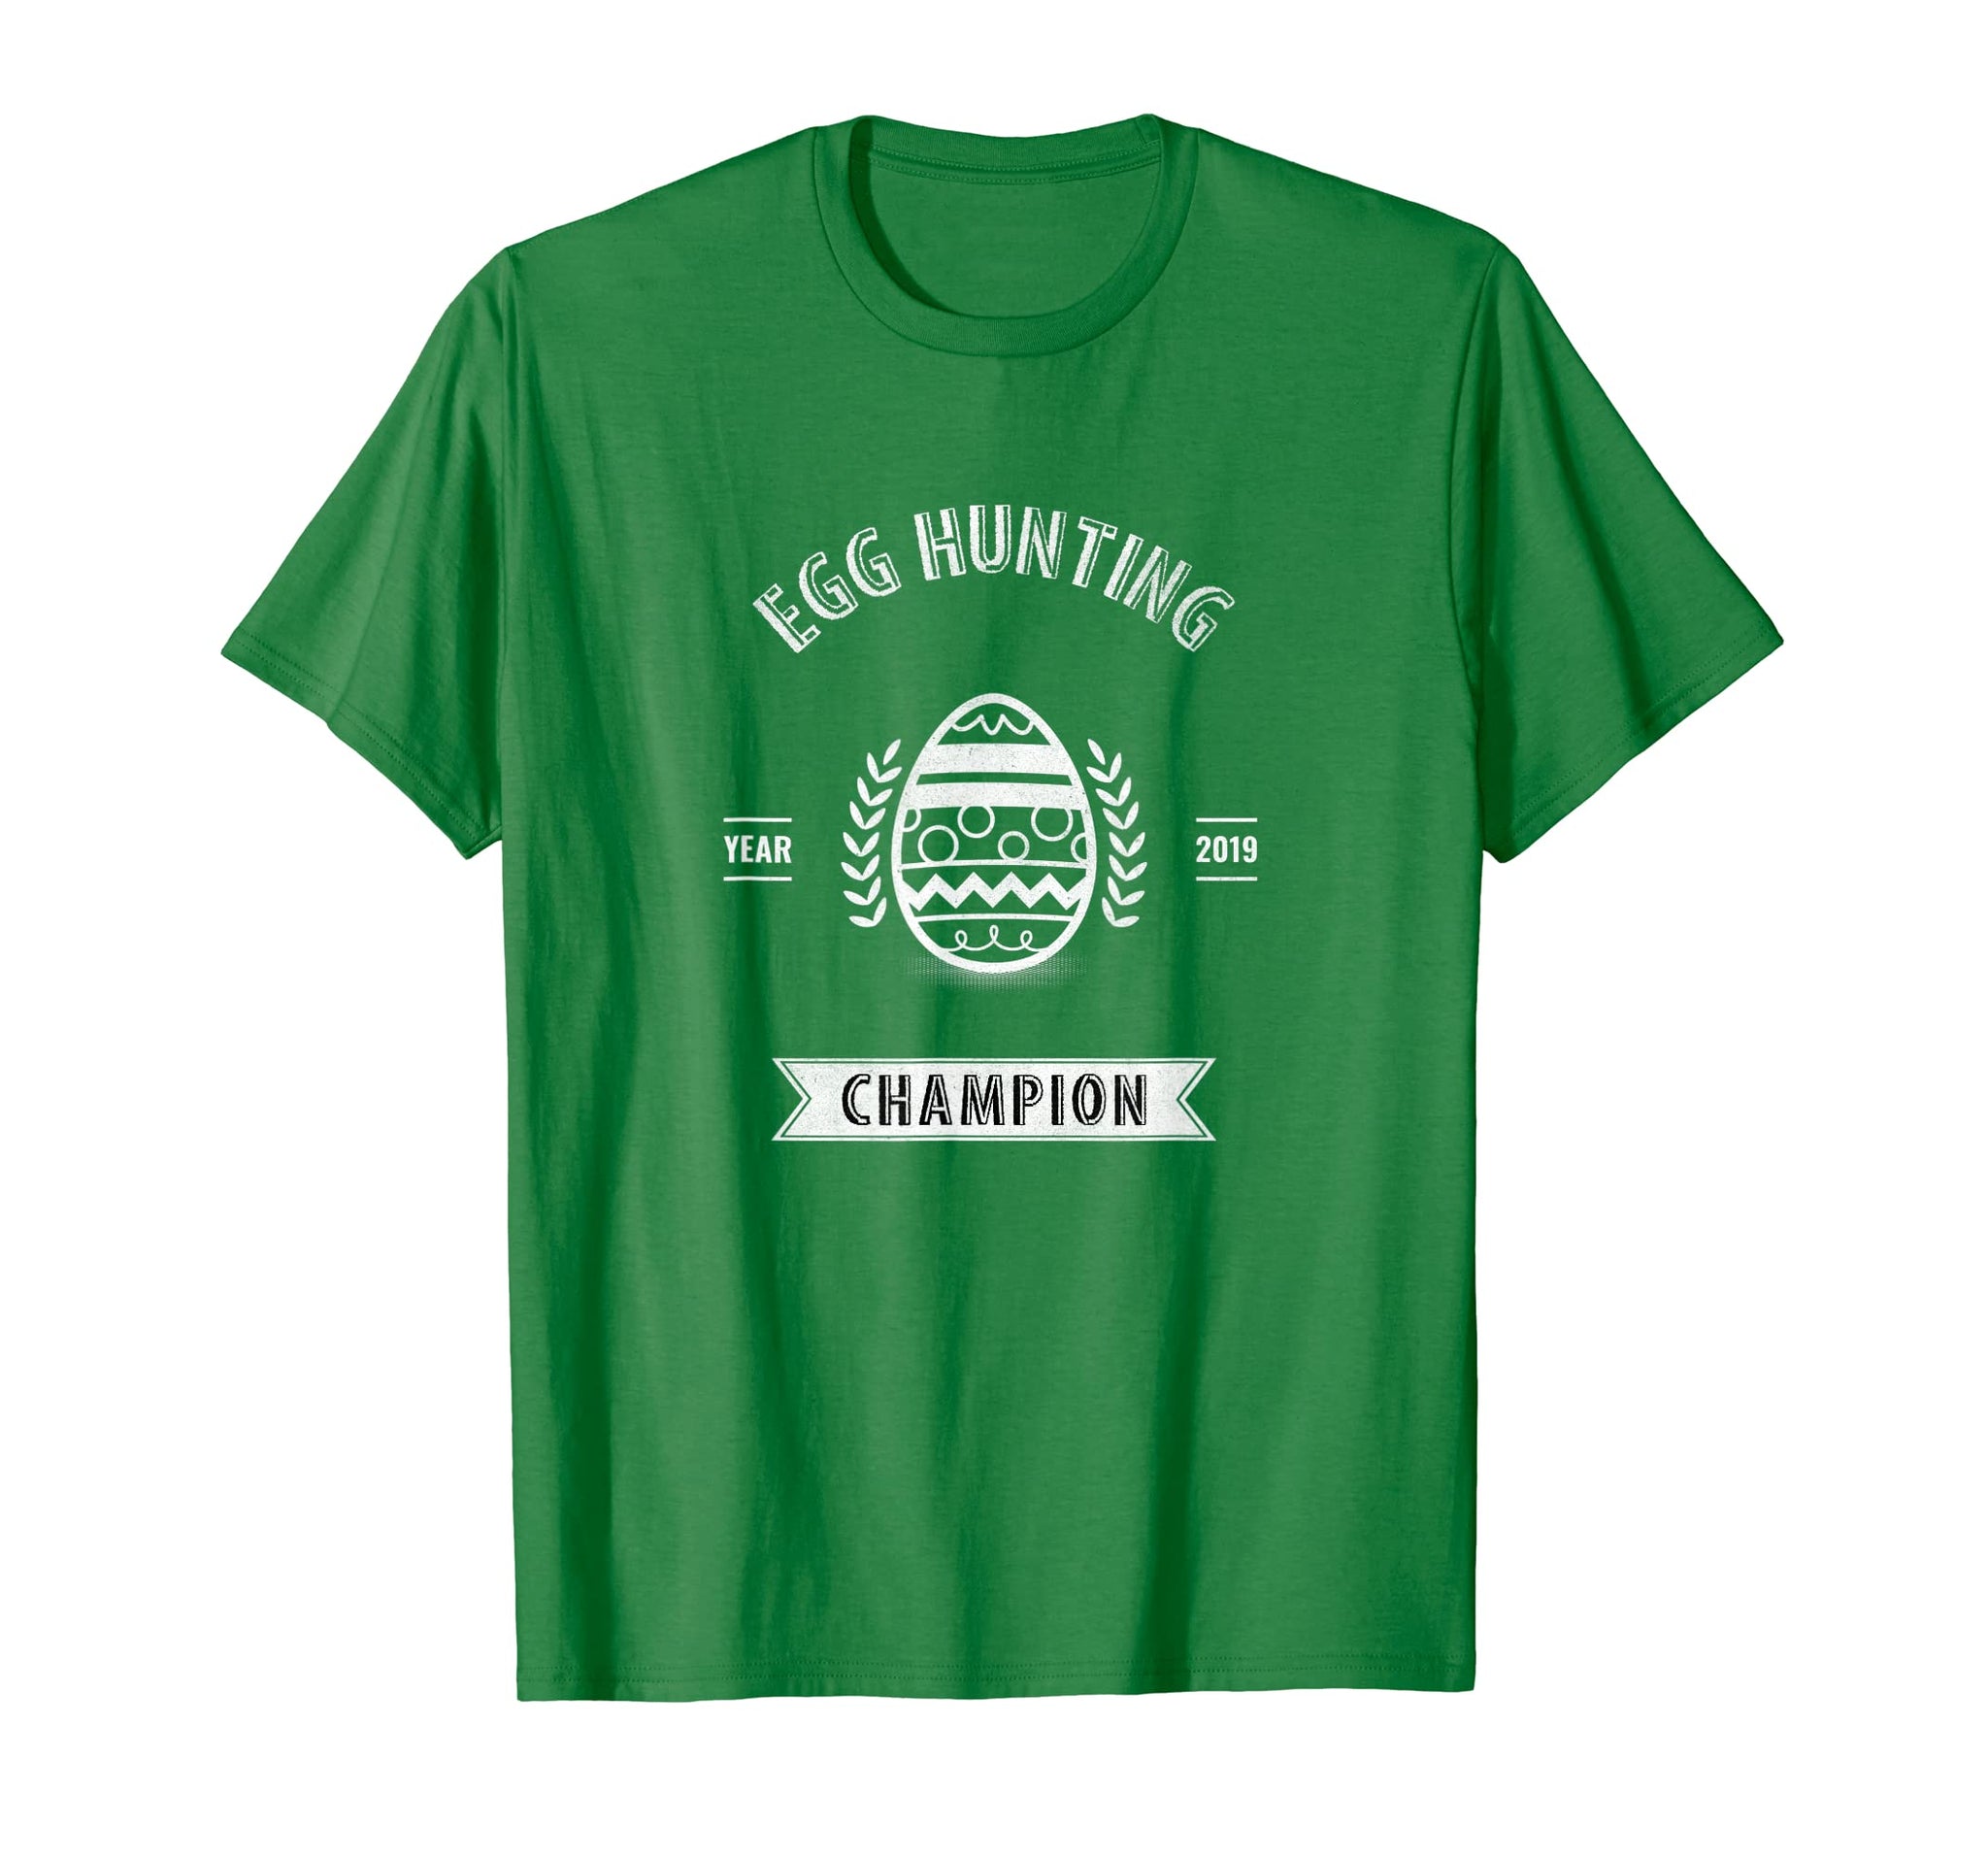 champion shirt outfit